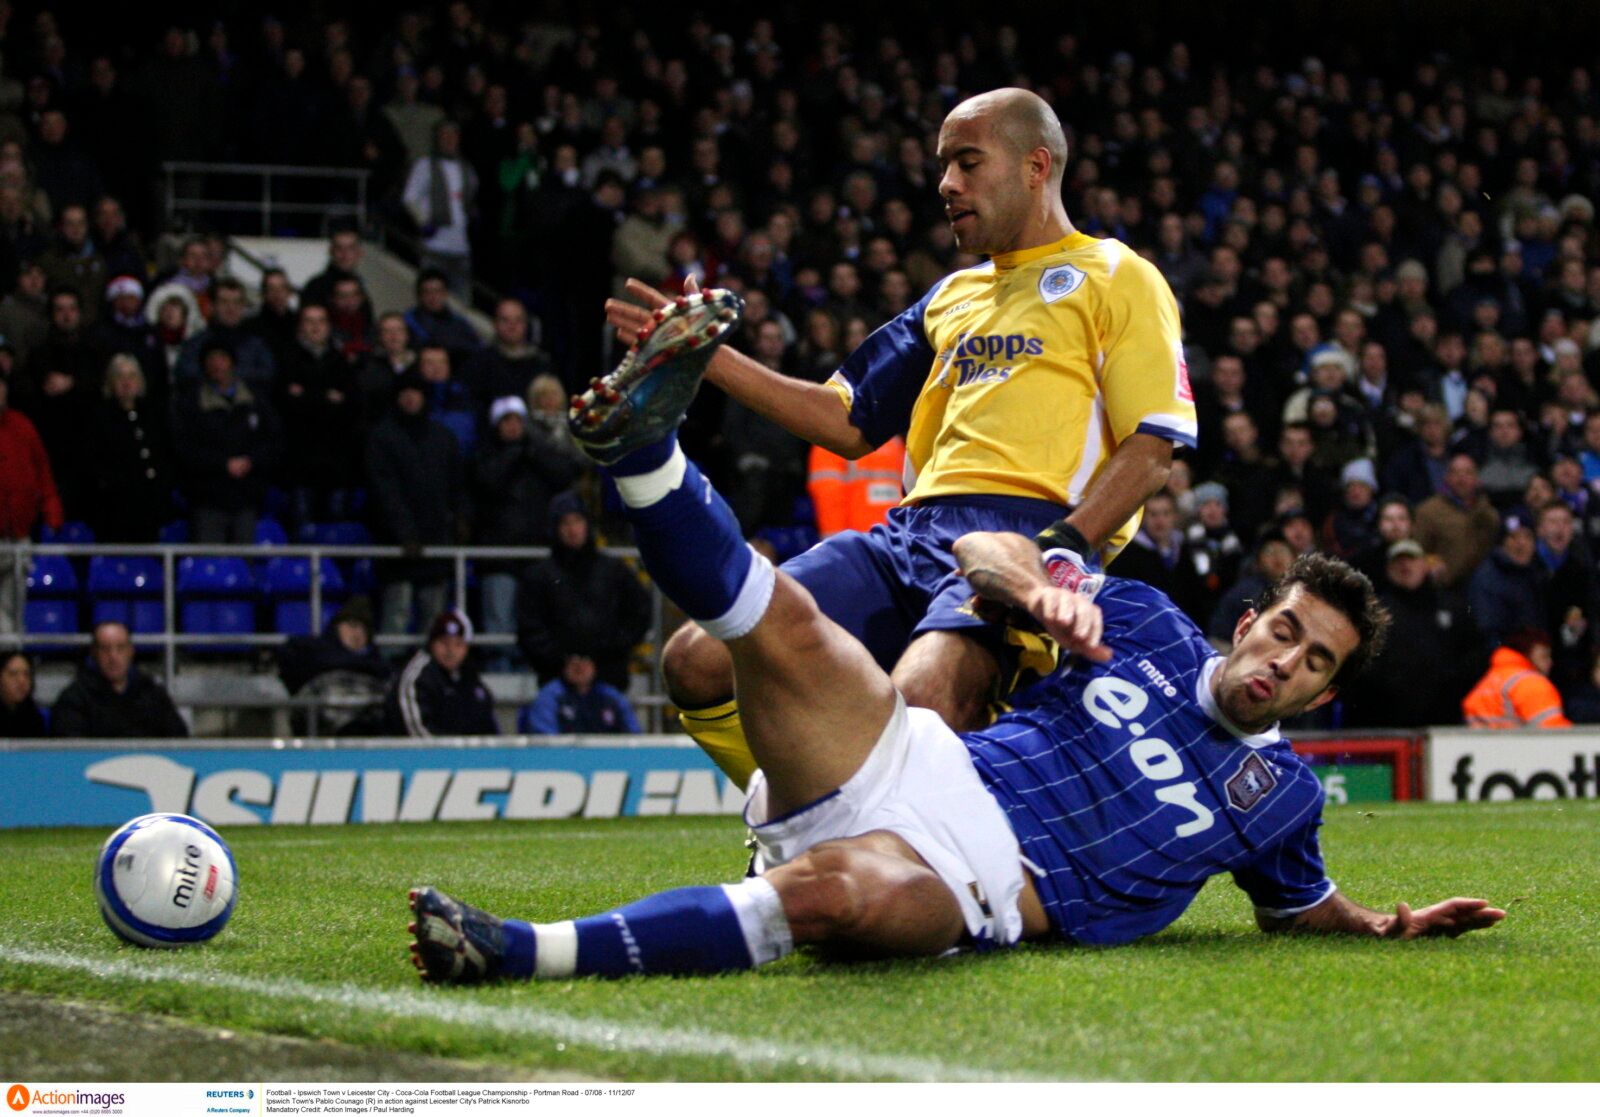 Football - Ipswich Town v Leicester City - Coca-Cola Football League Championship - Portman Road - 07/08 - 11/12/07 
Ipswich Town's Pablo Counago (R) in action against Leicester City's Patrick Kisnorbo 
Mandatory Credit: Action Images / Paul Harding